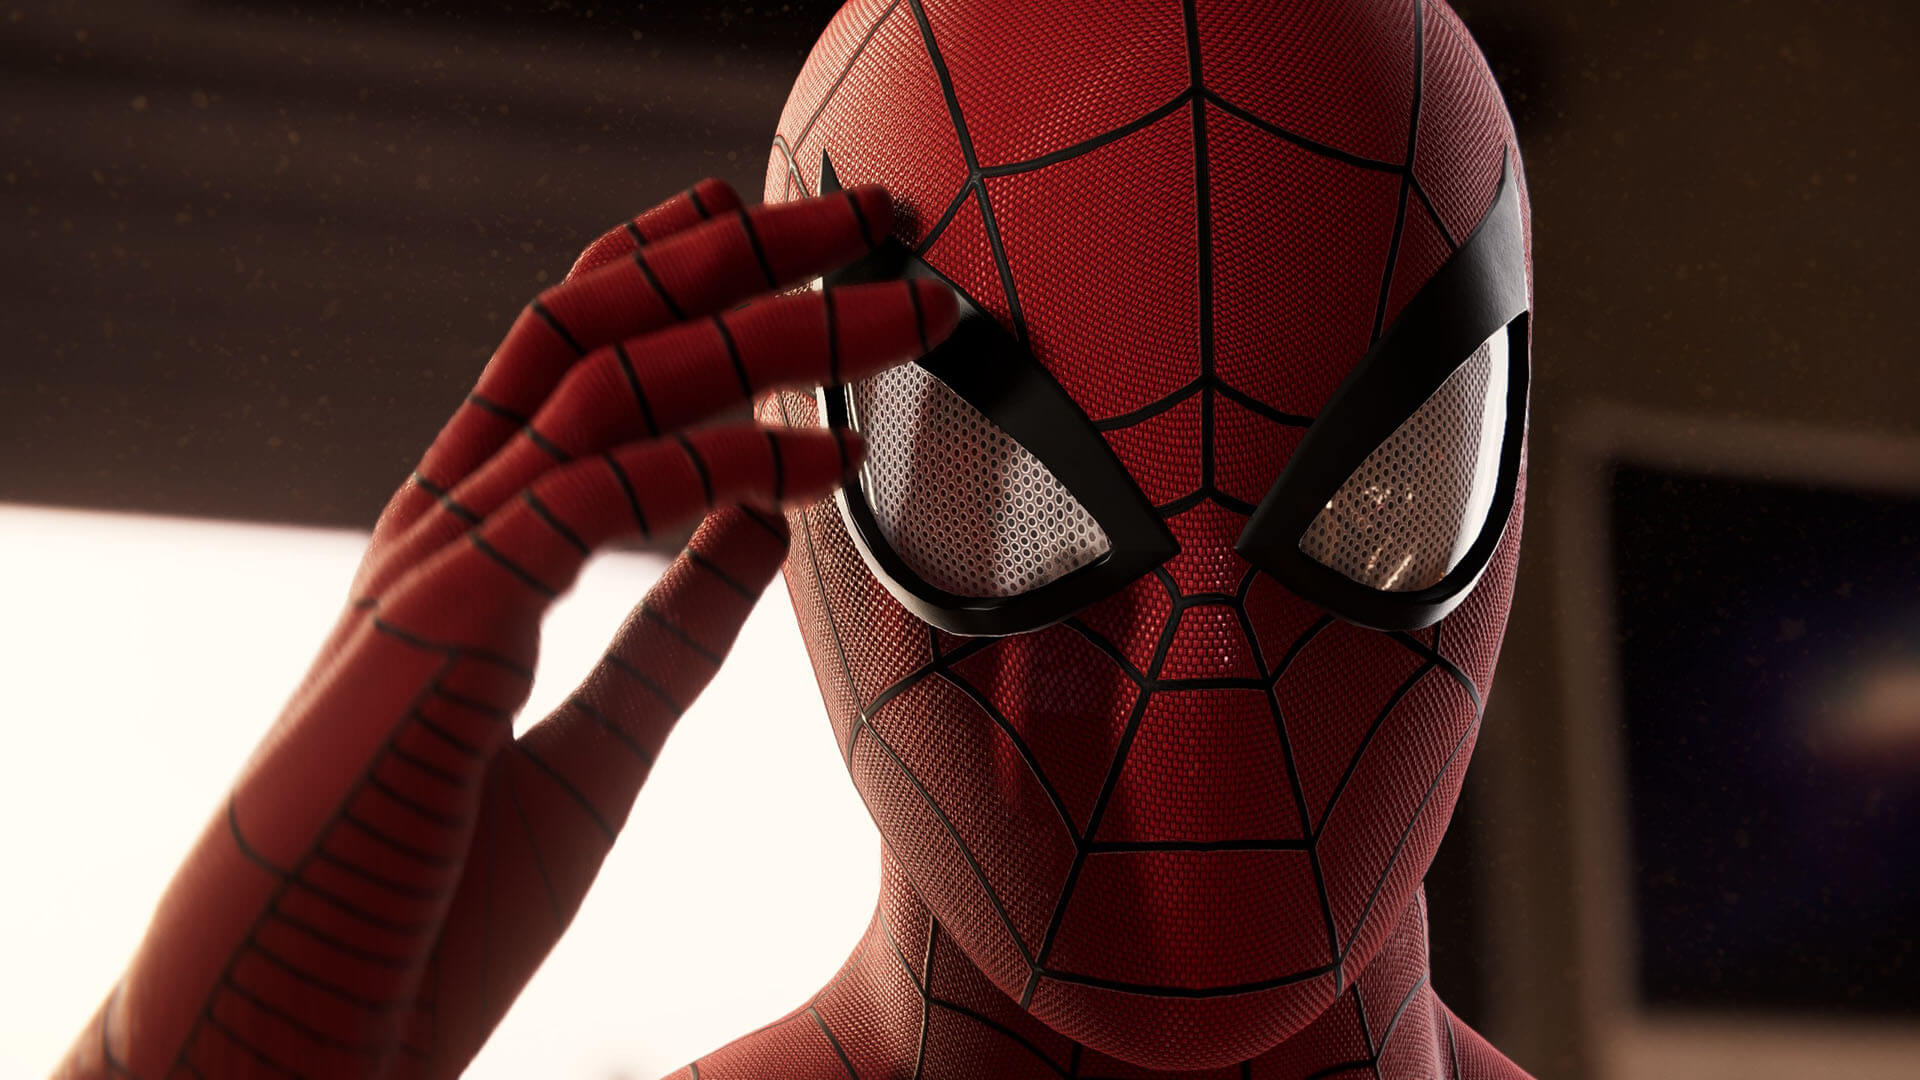 Marvel's Spider-Man Remastered [PC] Review - The best Spider-Man